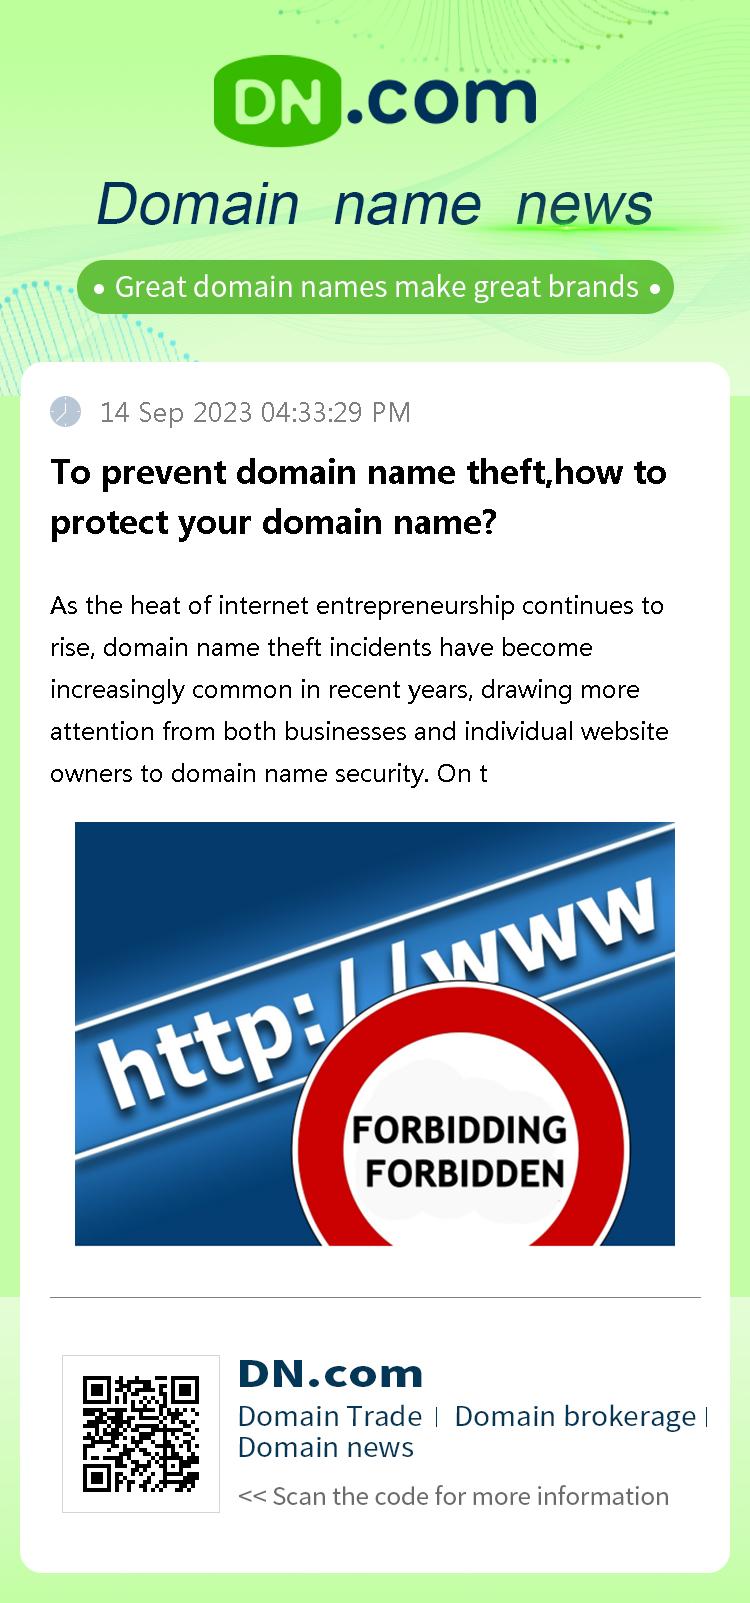 To prevent domain name theft,how to protect your domain name?